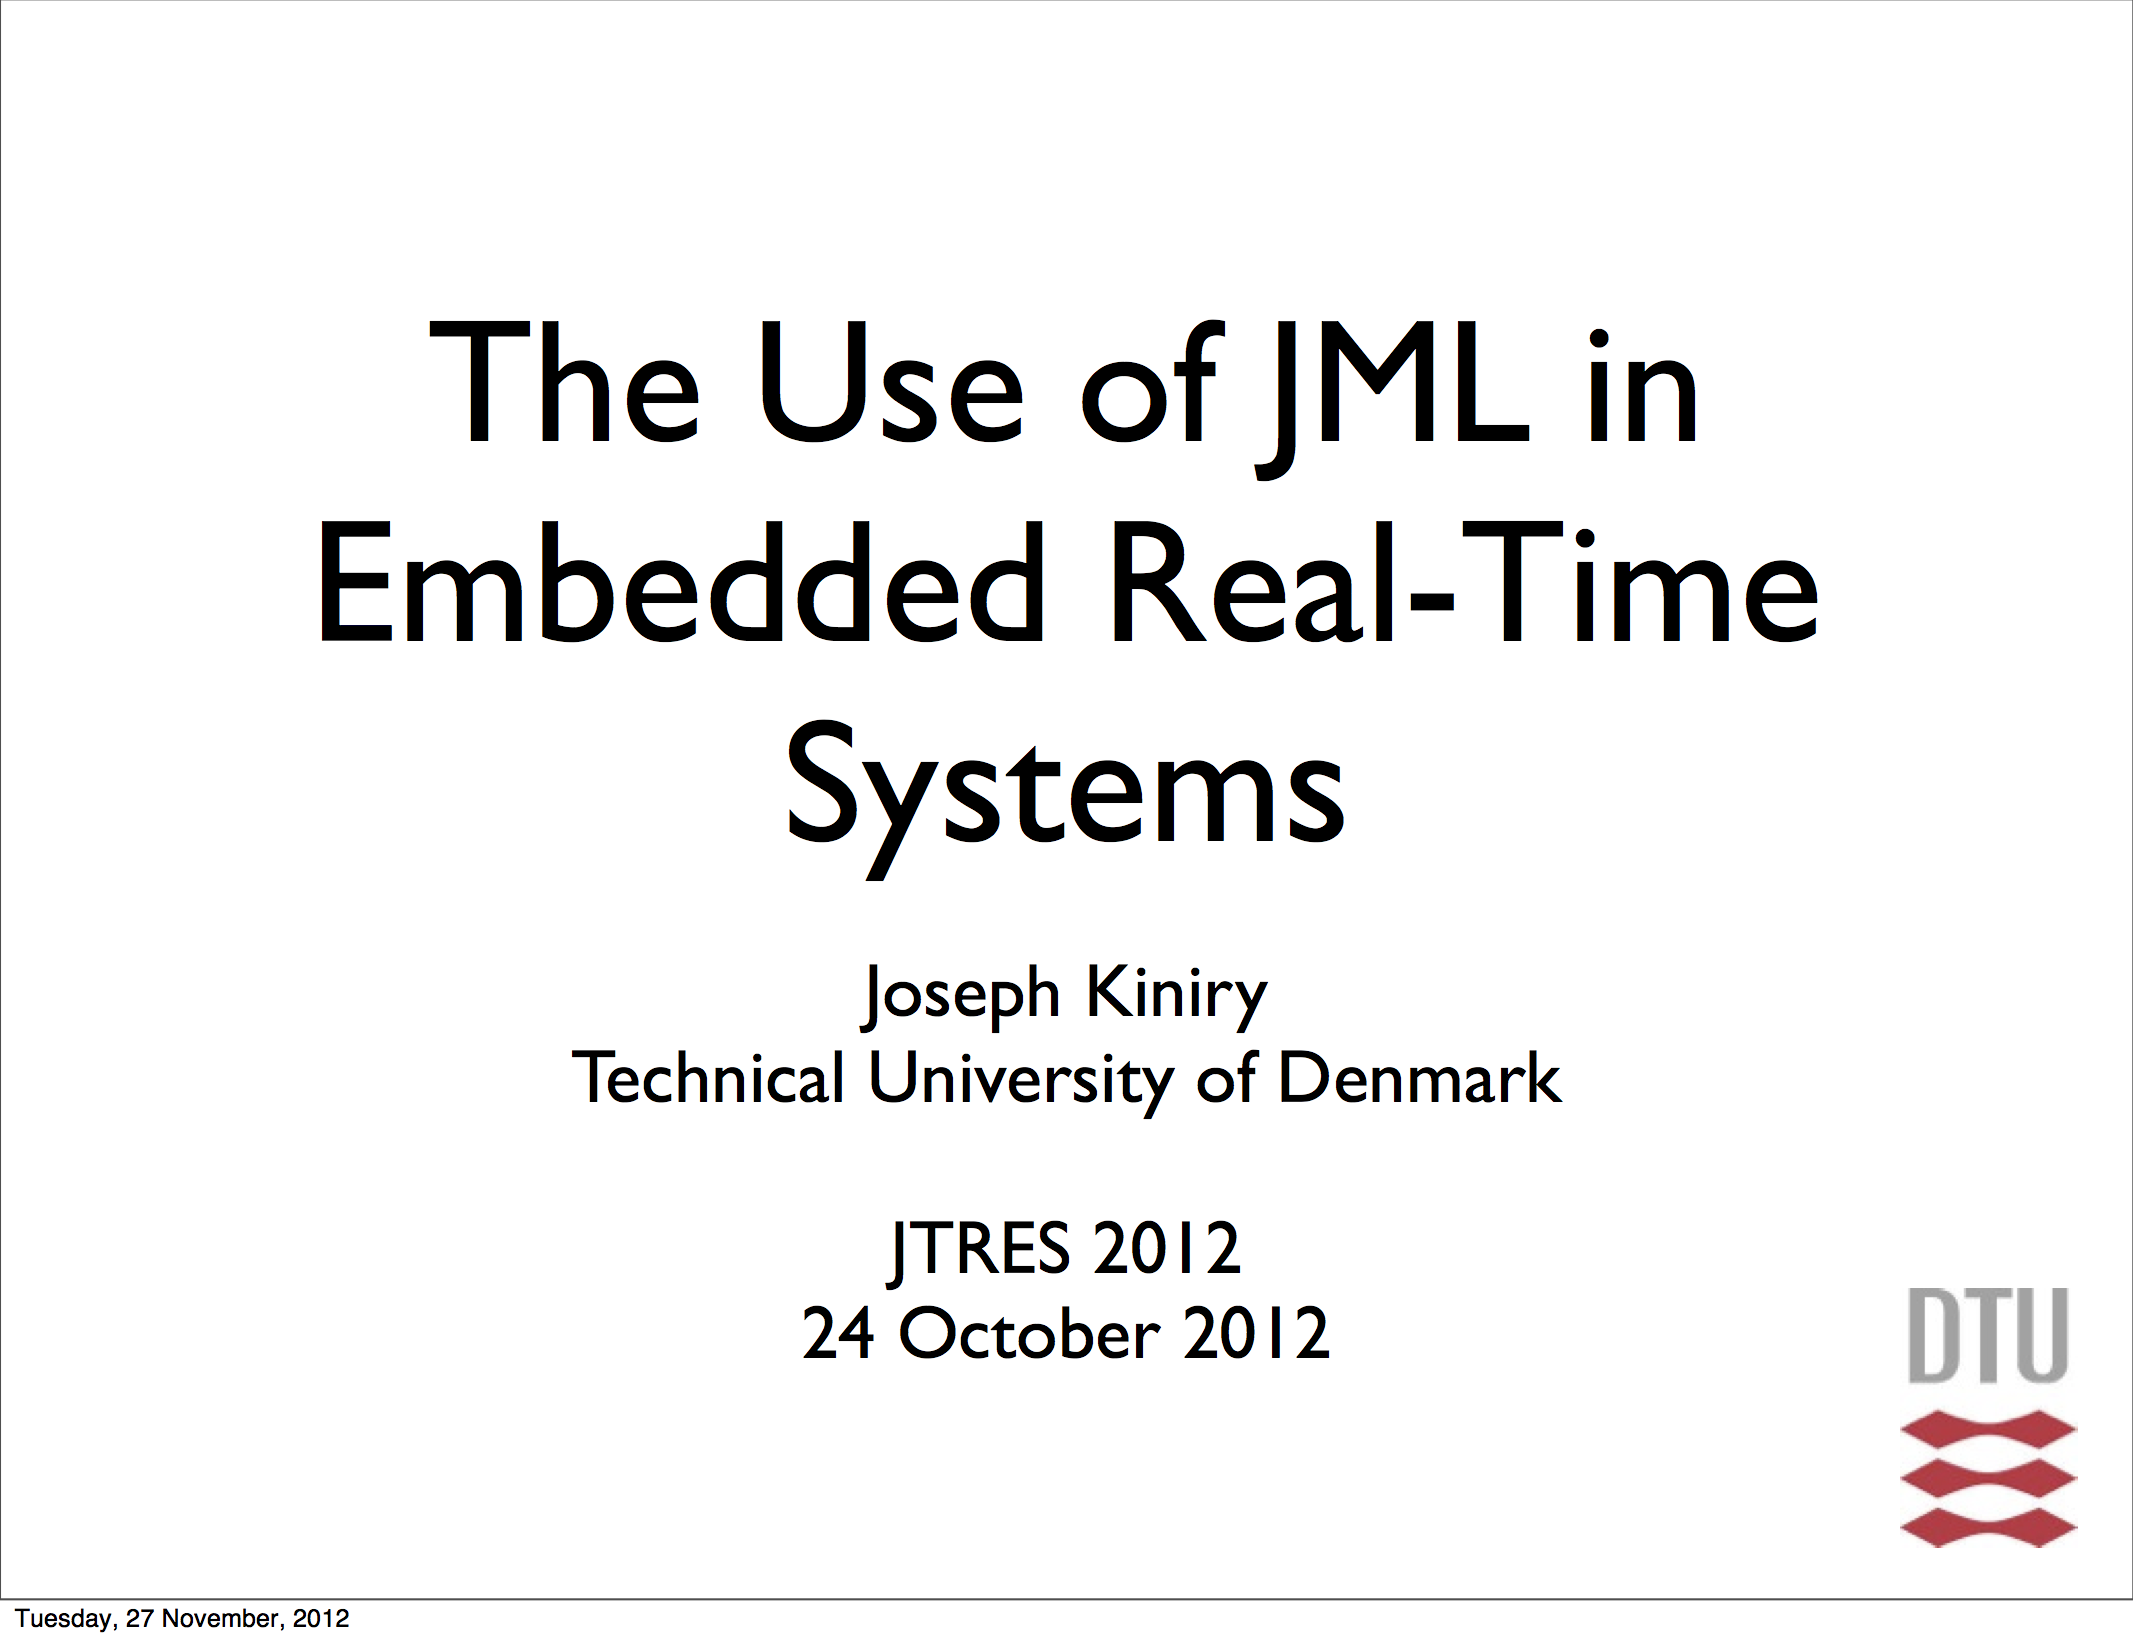 The Use of JML in Embedded
        Real-Time Systems